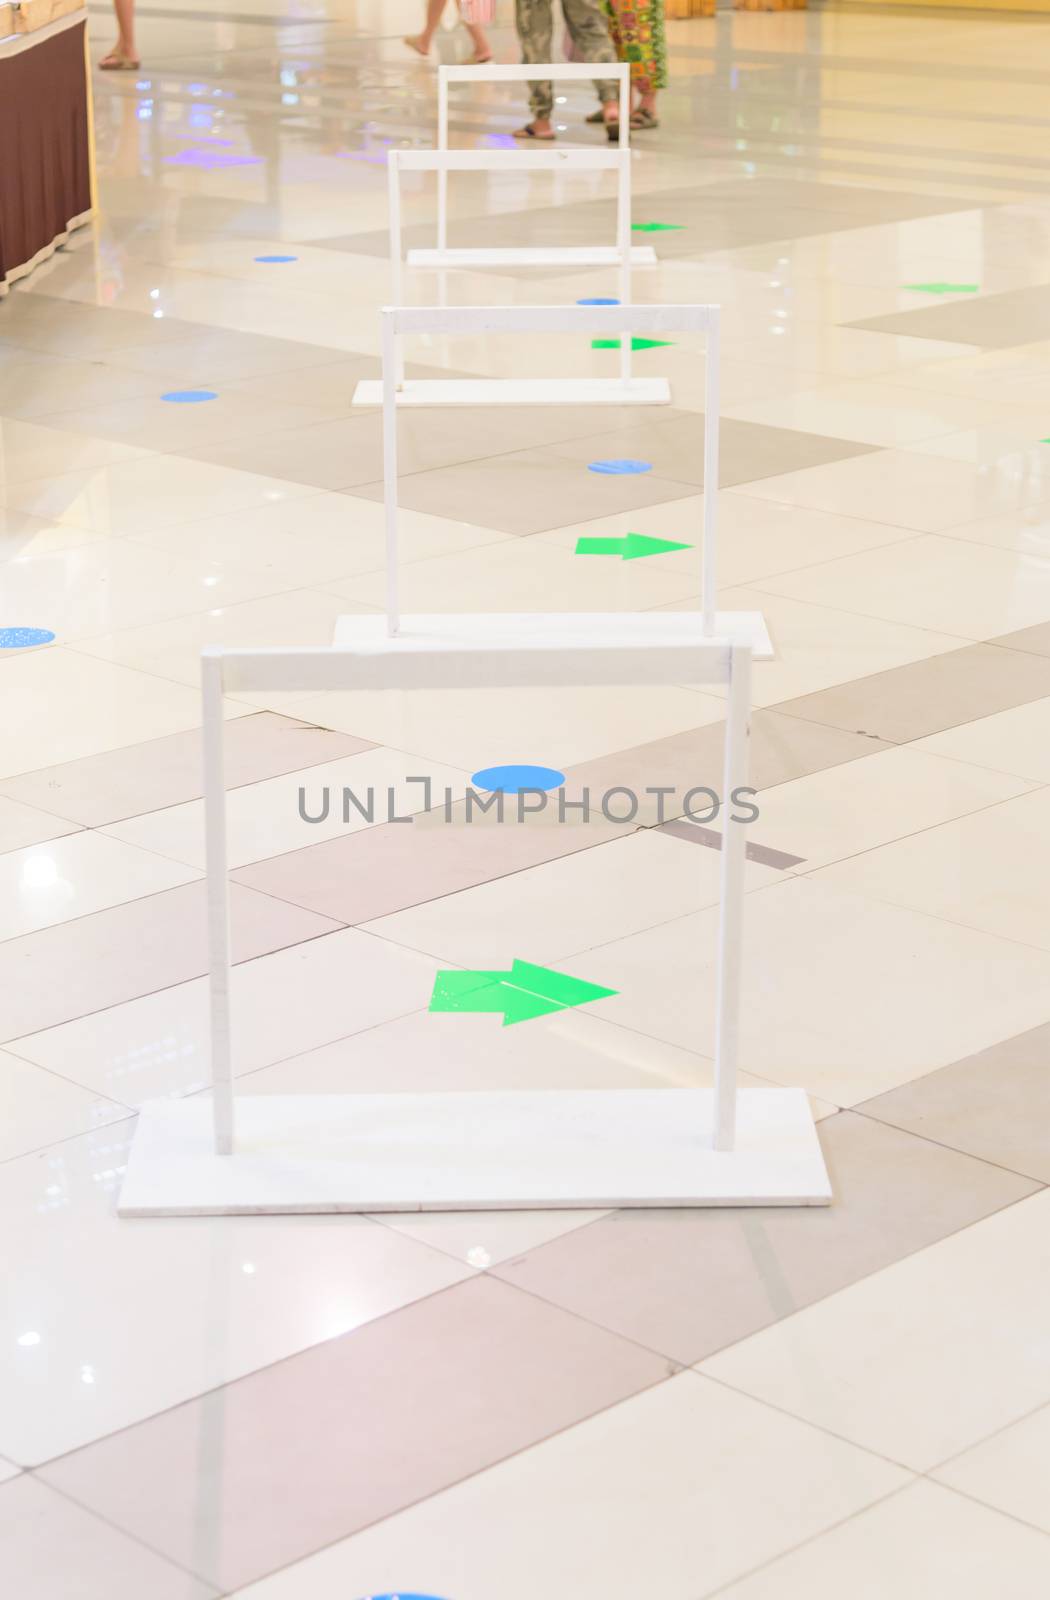 social distancing sign at the floor for shopping Queue by rukawajung